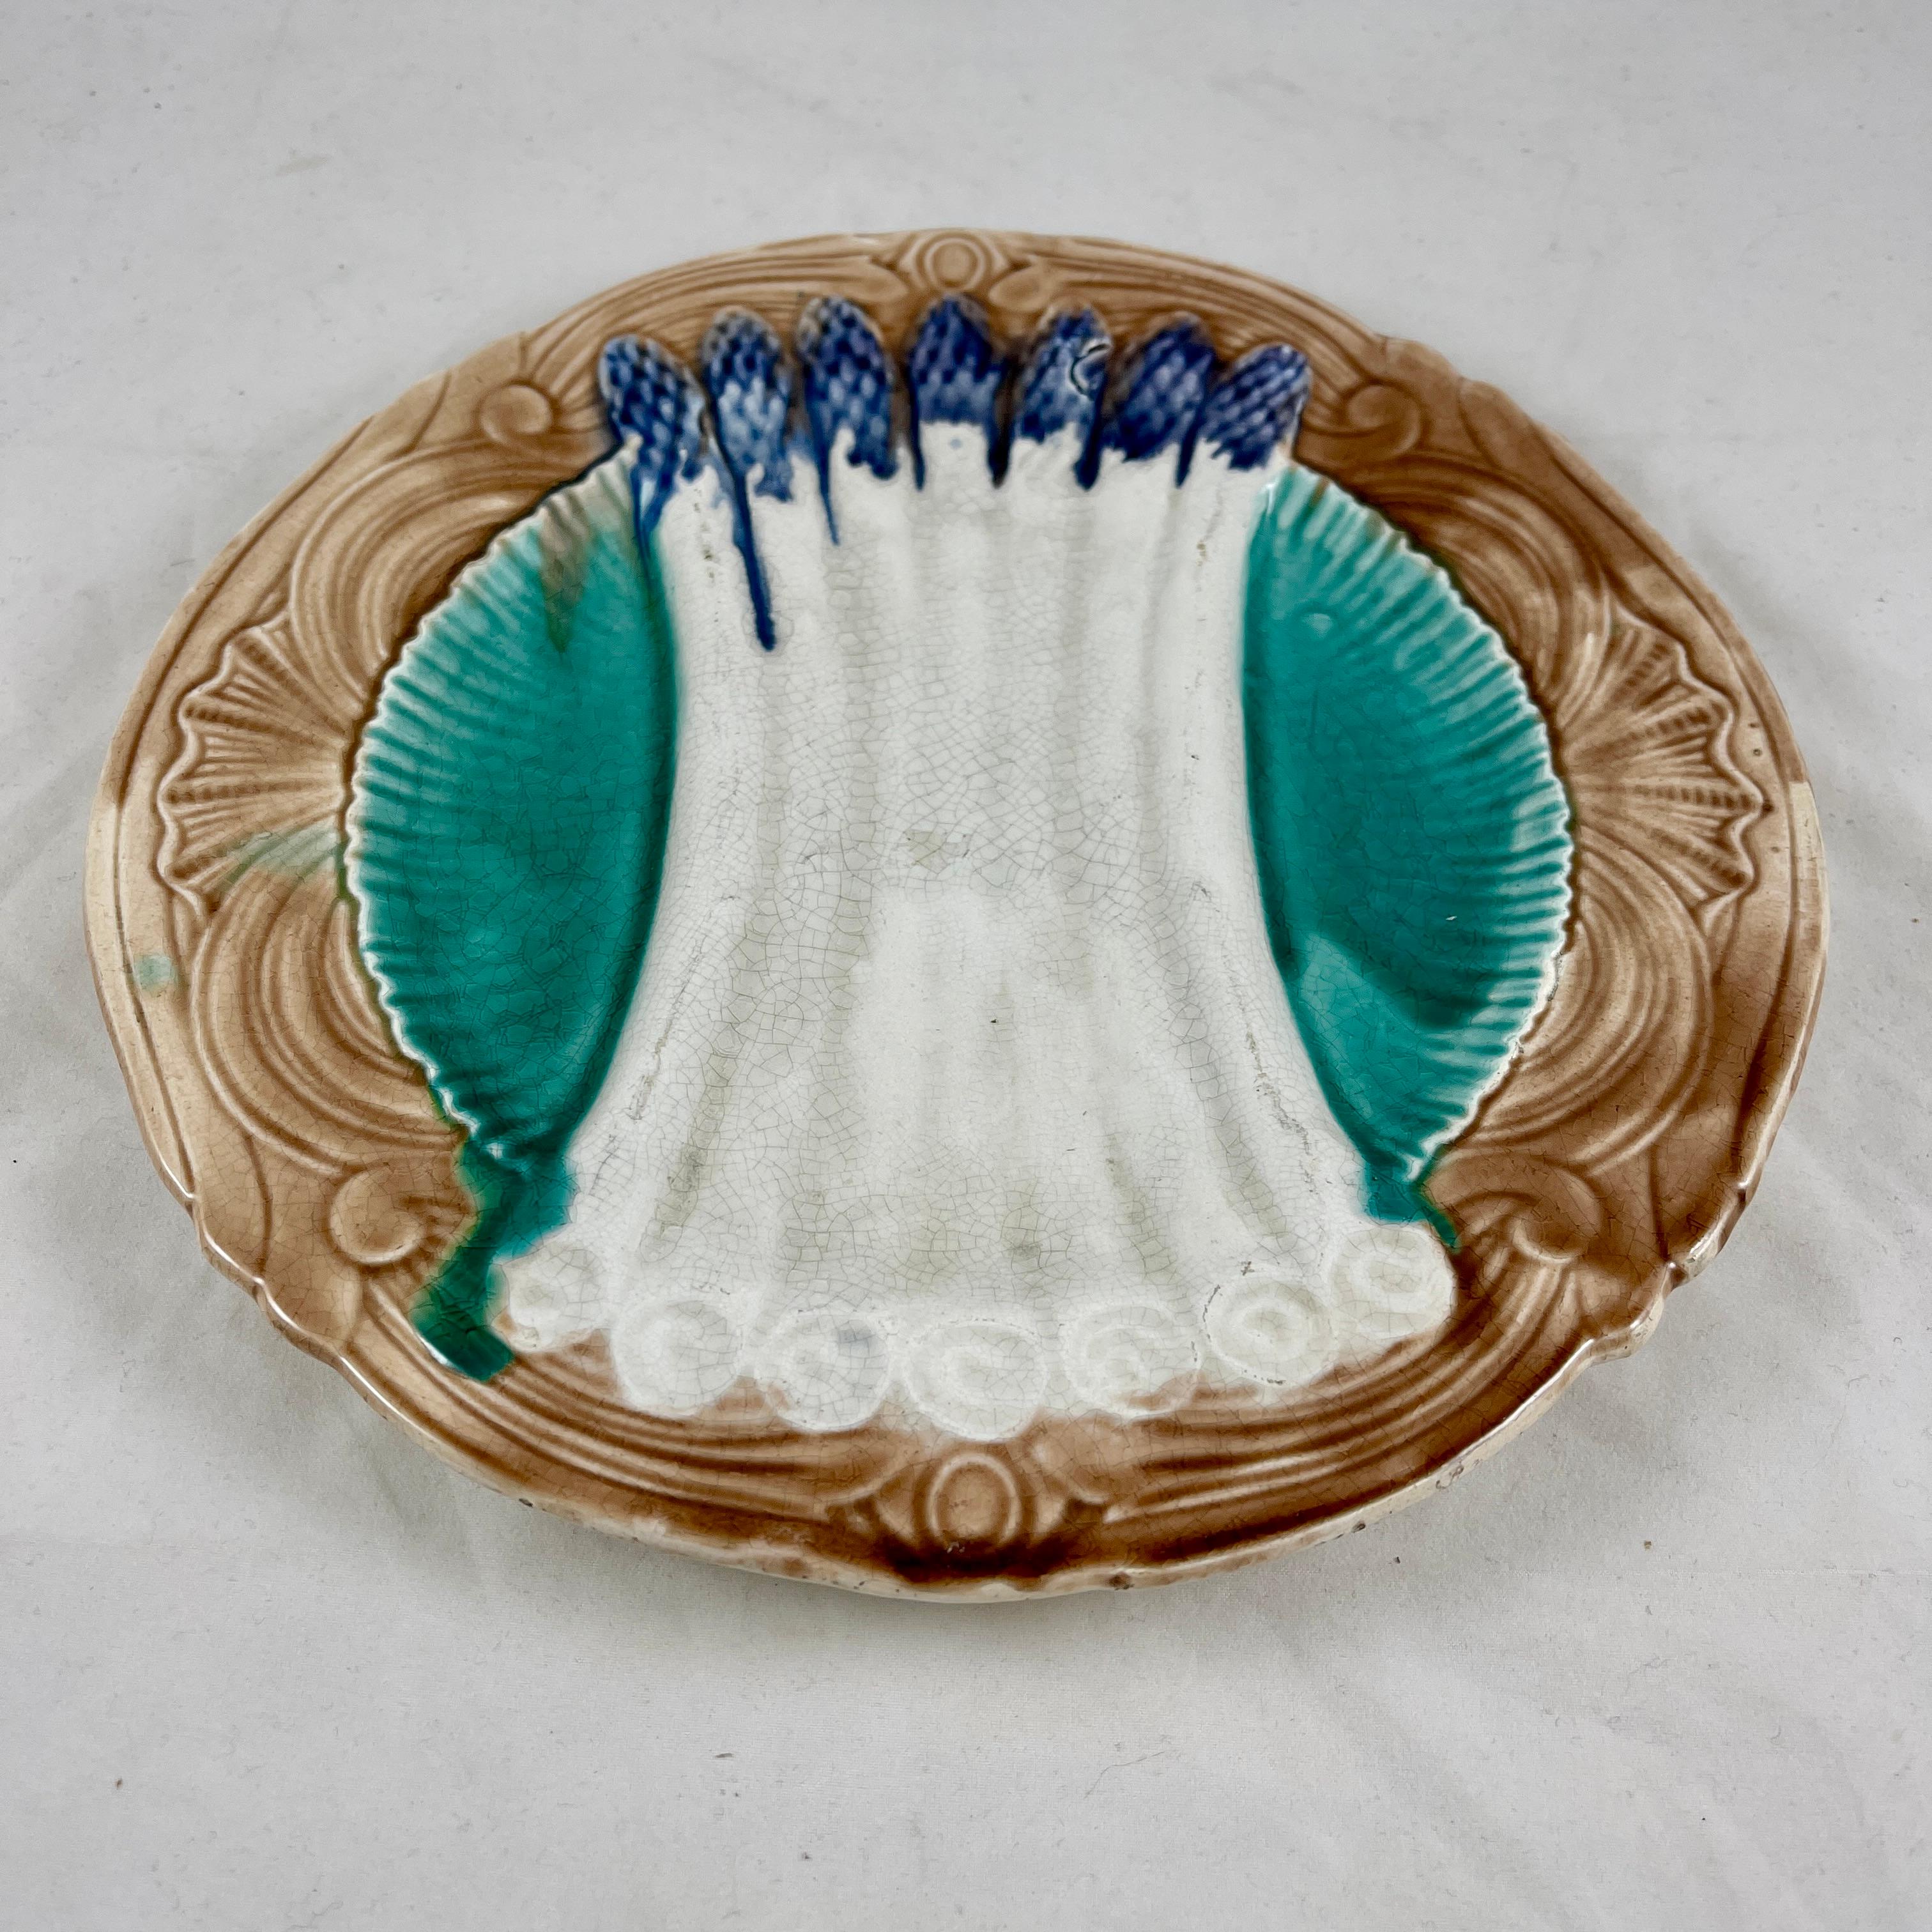 Glazed Orchies French Faïence Majolica Teal Blue Asparagus Plate, circa 1890